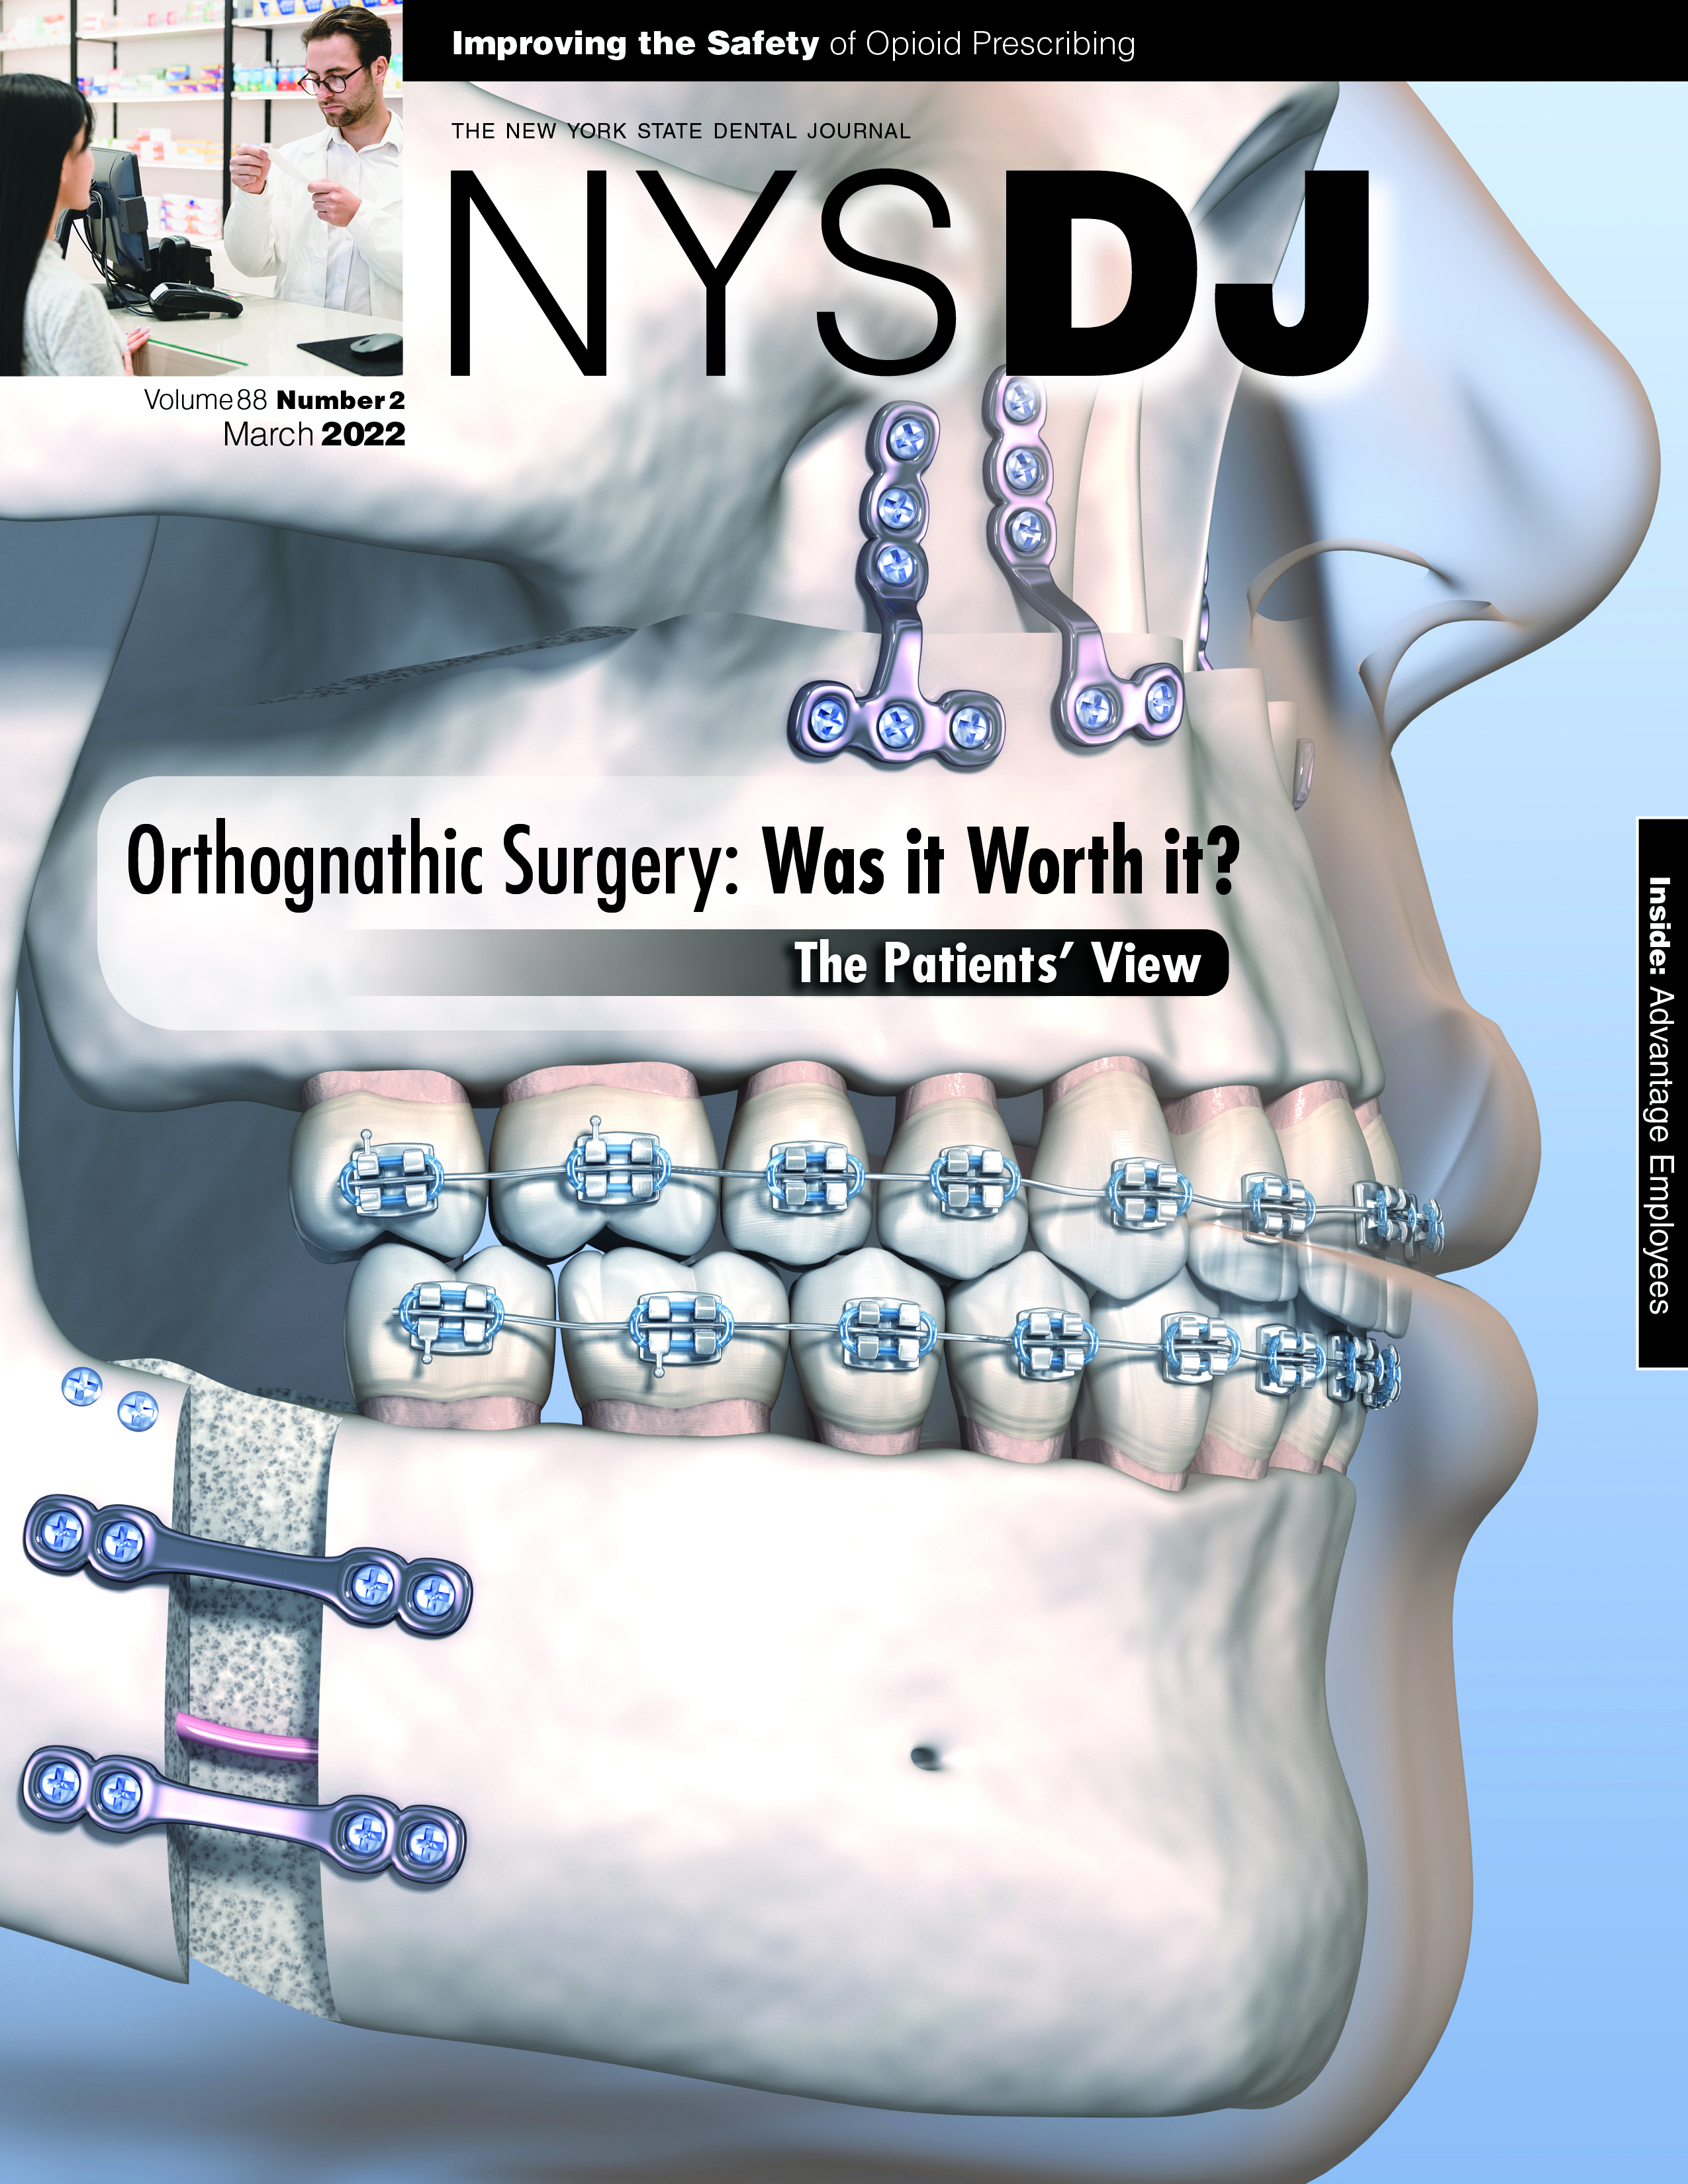 Cover of the NYSDJ with an illustration of a human skull post-orthognathic surgery.